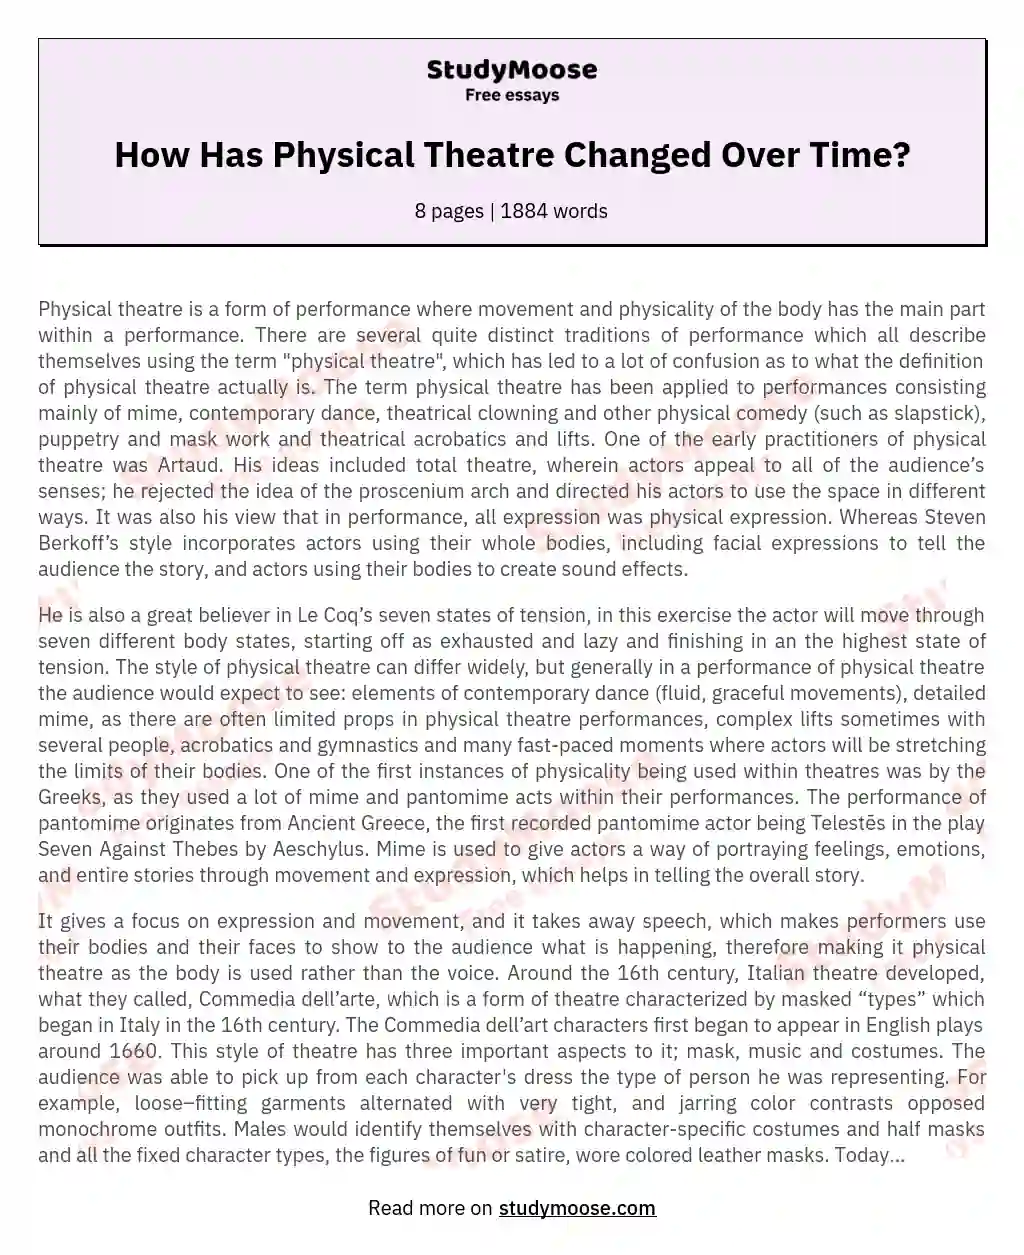 How Has Physical Theatre Changed Over Time? essay